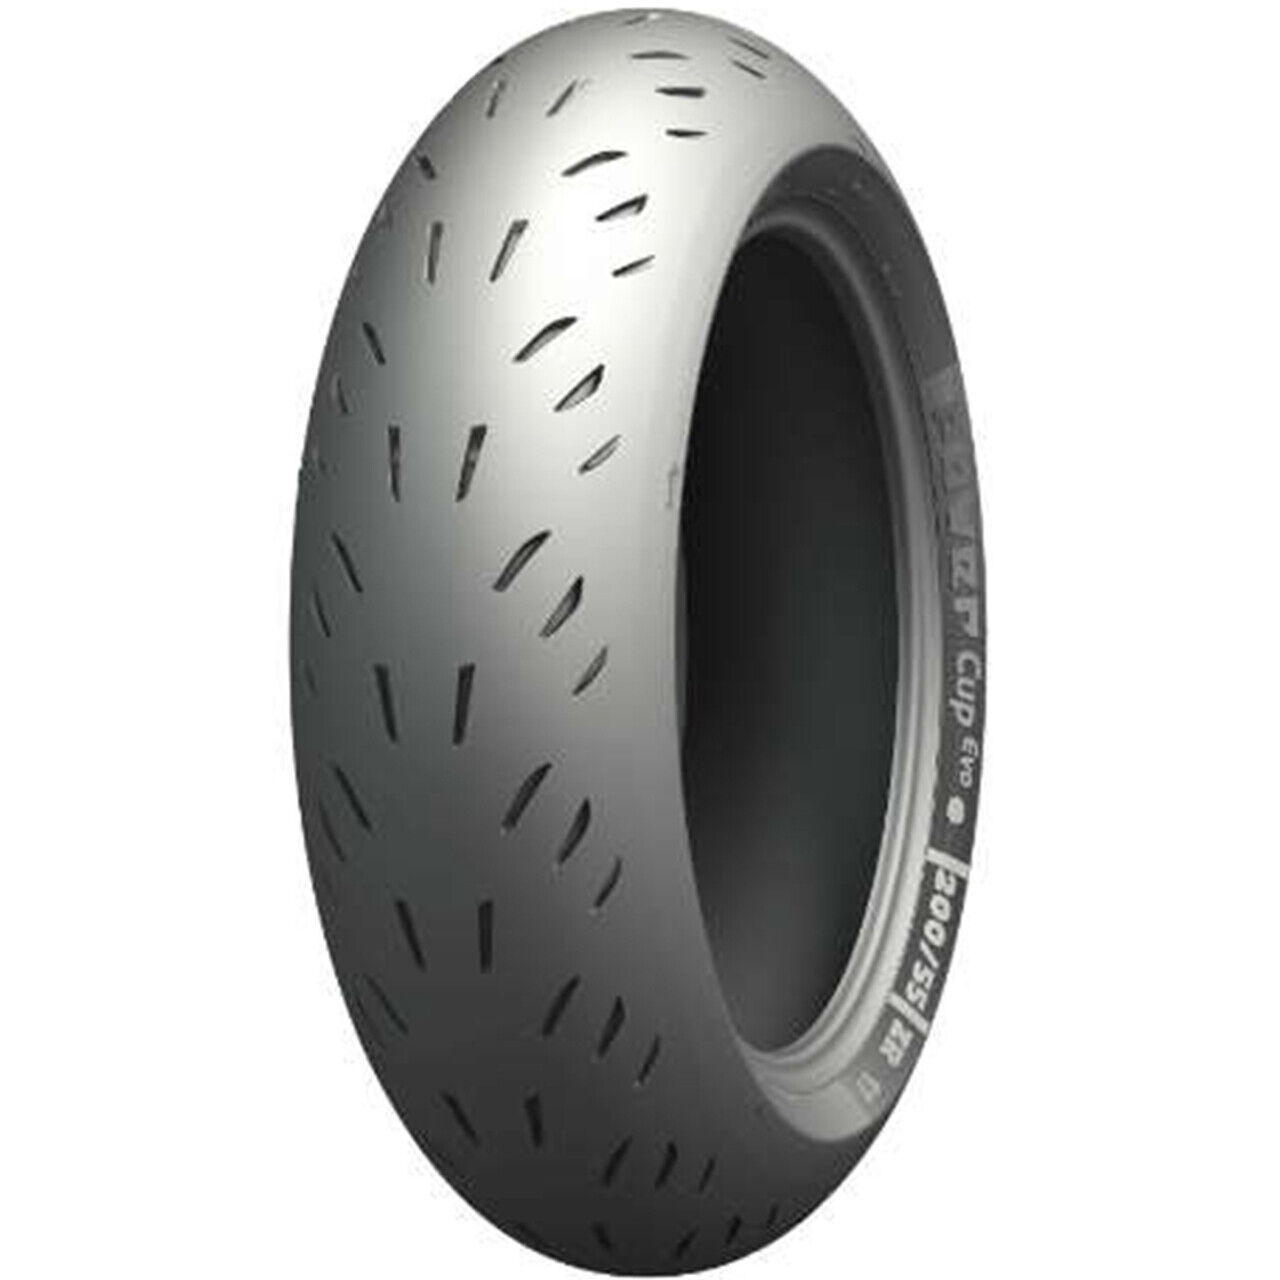 Michelin Power Cup Performance Motorcycle Race Tire 190/55-17 Rear Medium 190 55